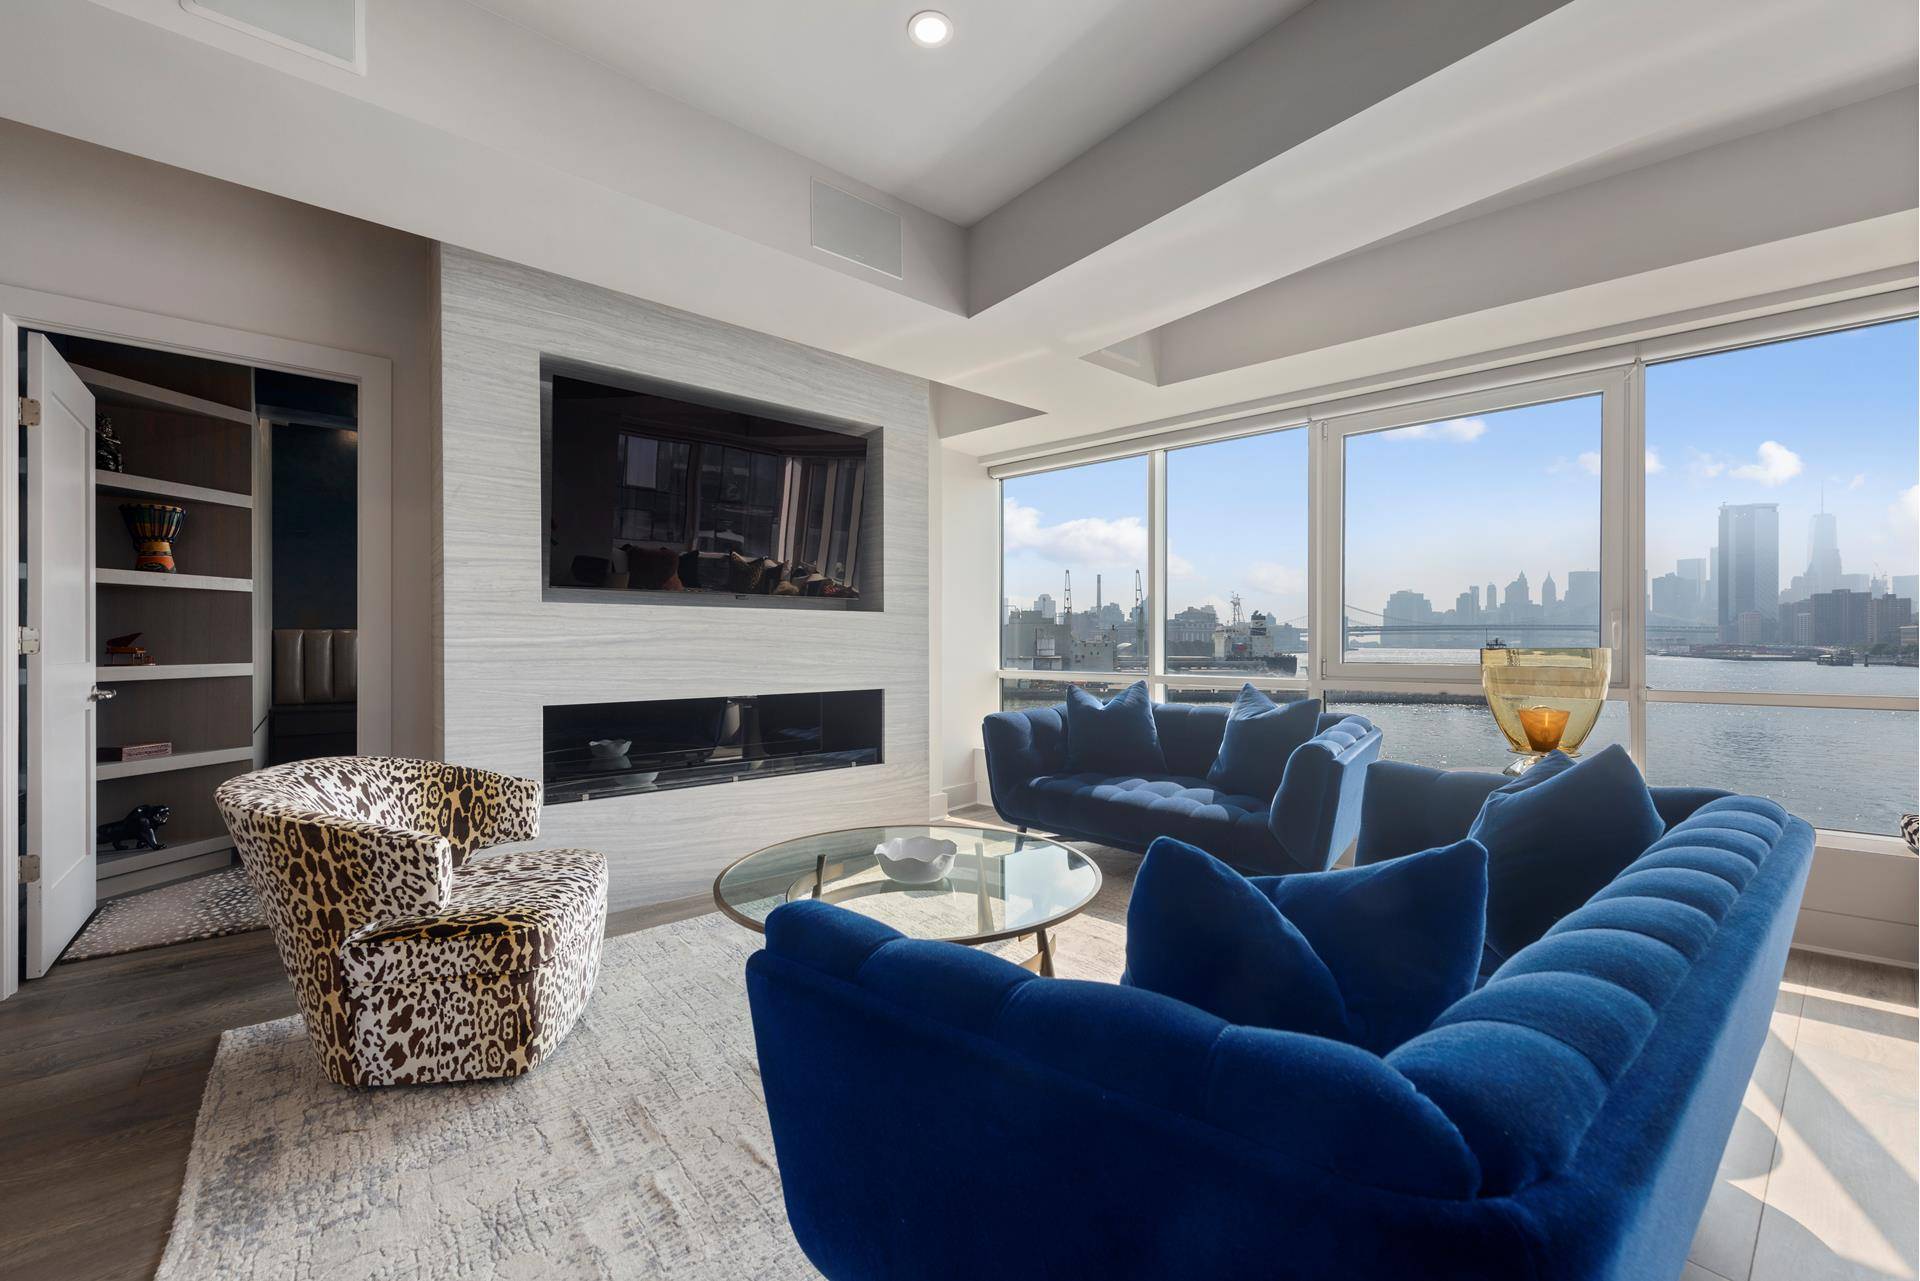 Welcome home this unparalleled designer decorated and turn key residence features sweeping and uplifting East River waterfront and un obstructed skyline views, ample living space, top of the line appliances ...